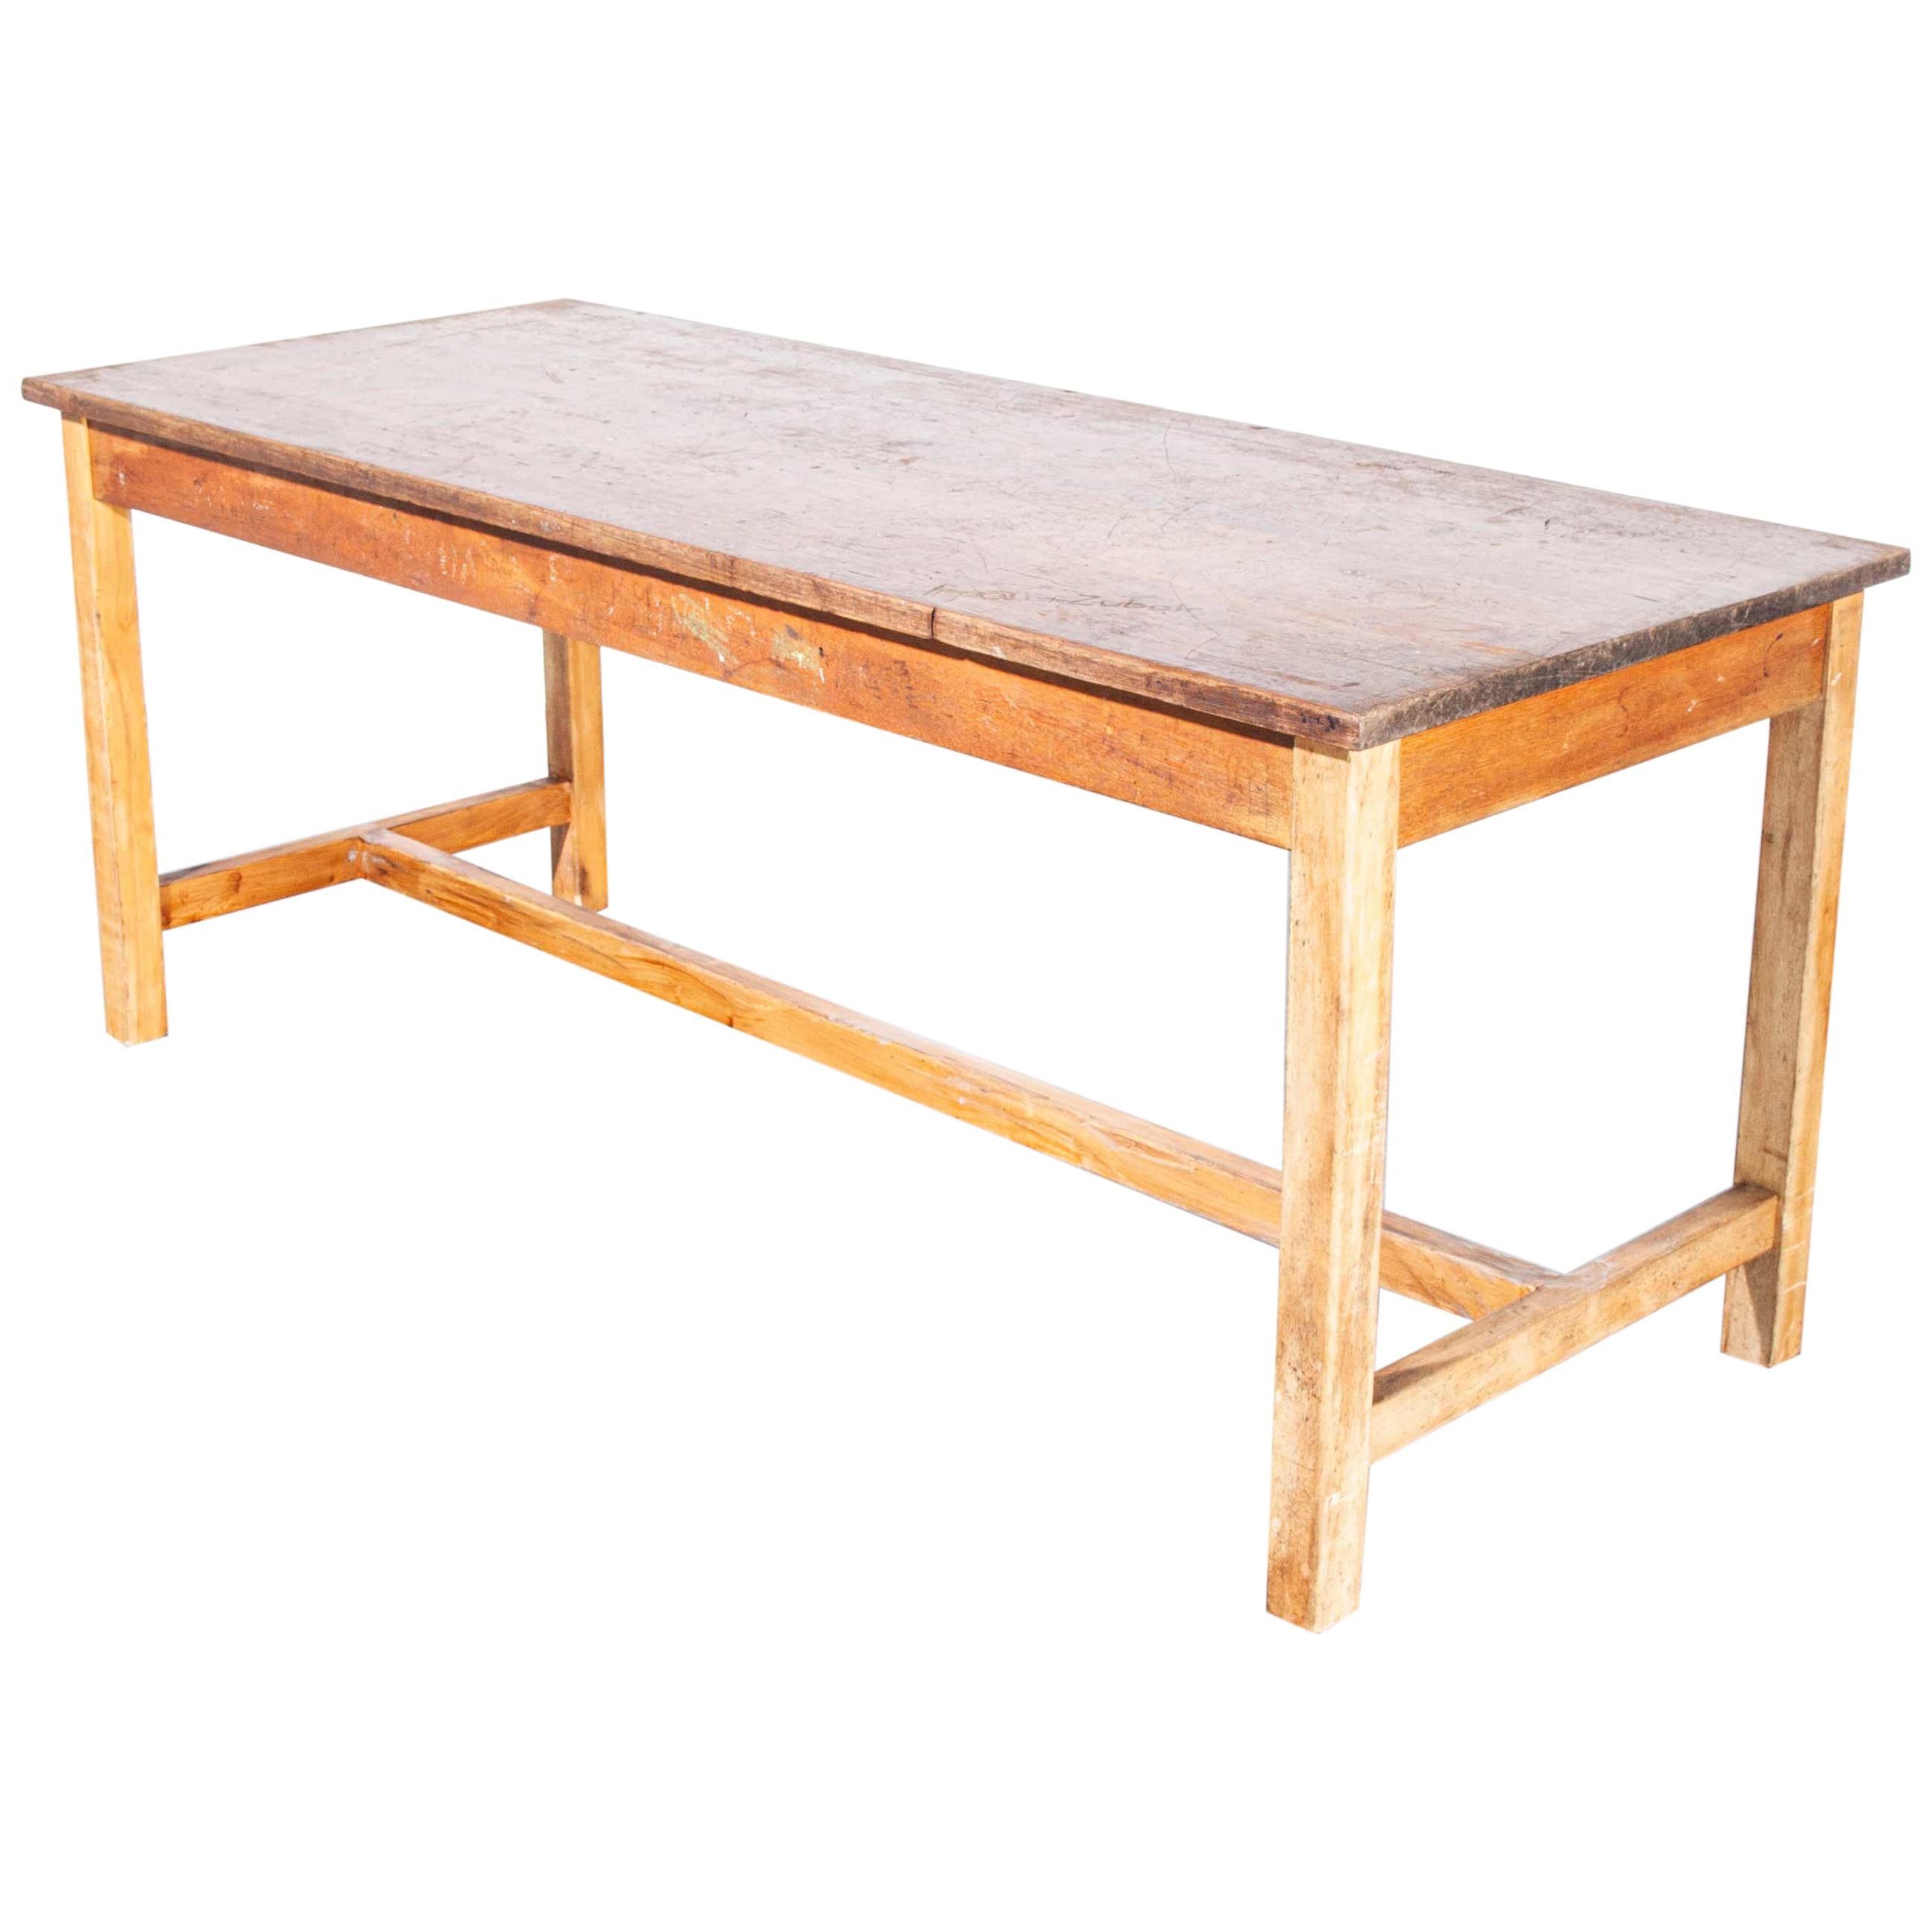 1950s English Original School Laboratory Dining Table with Solid Iroko Top